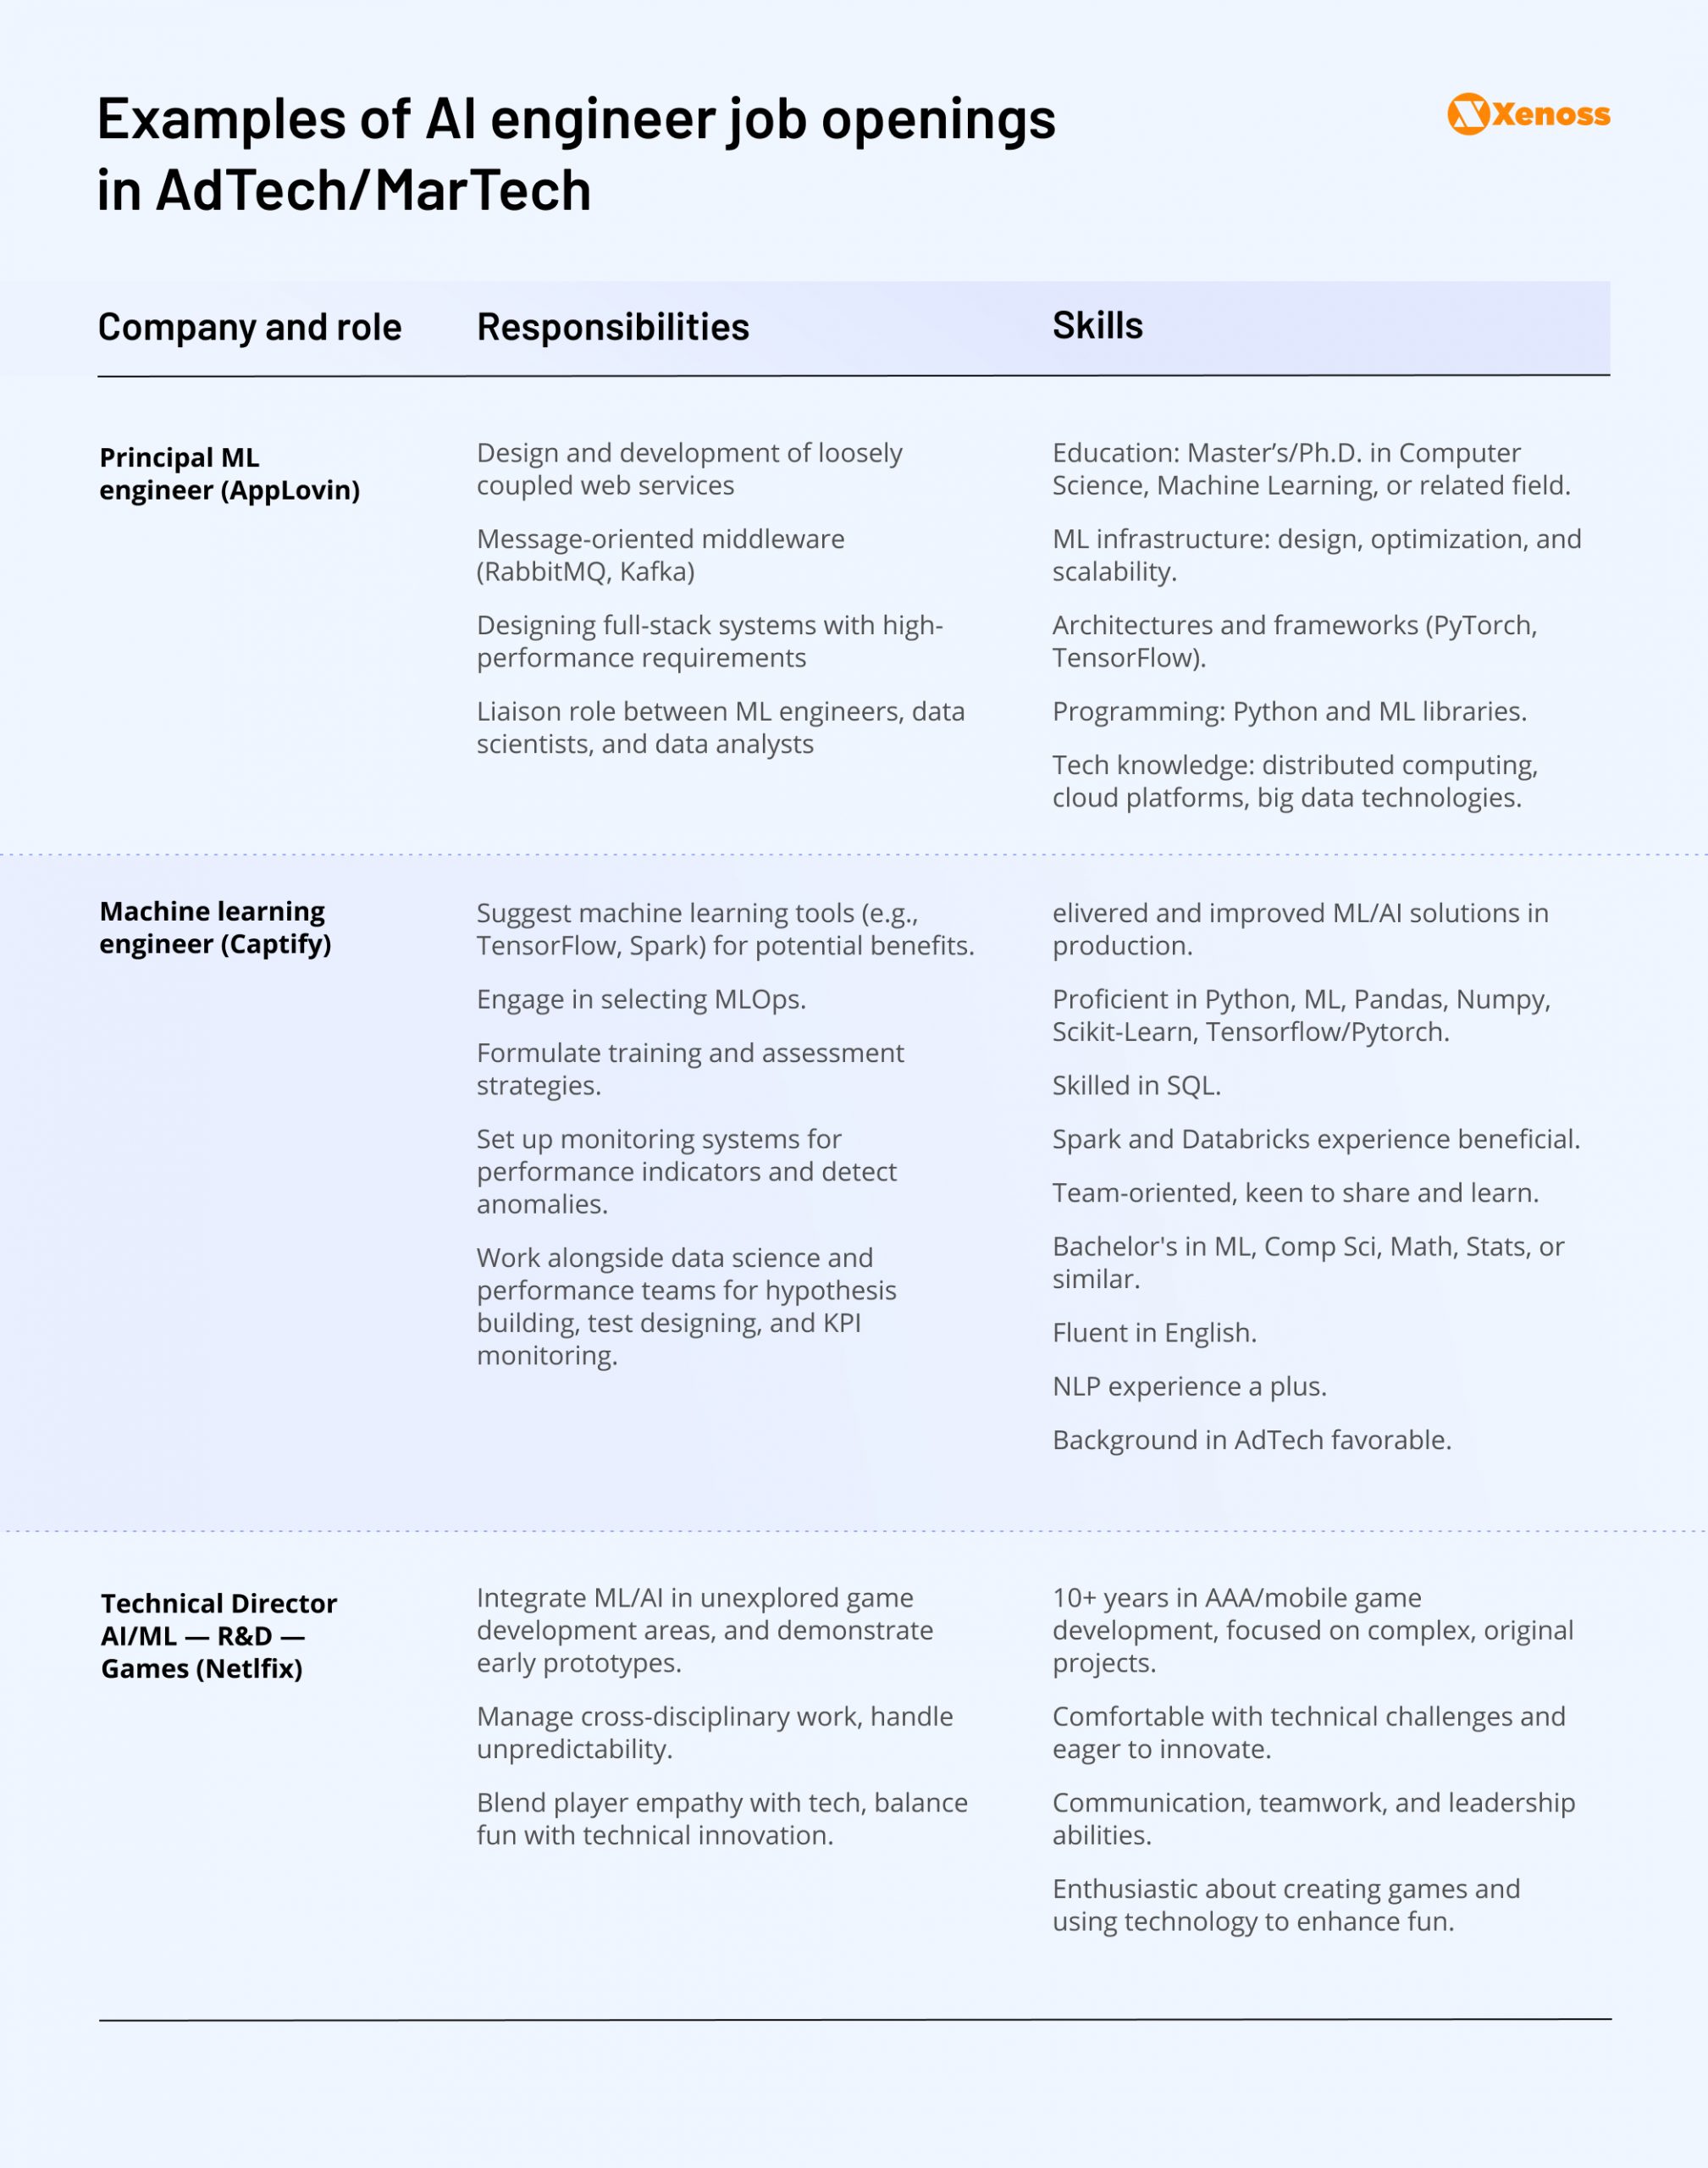 Table describing skills and responsibilities of AI engineers featured in job openings